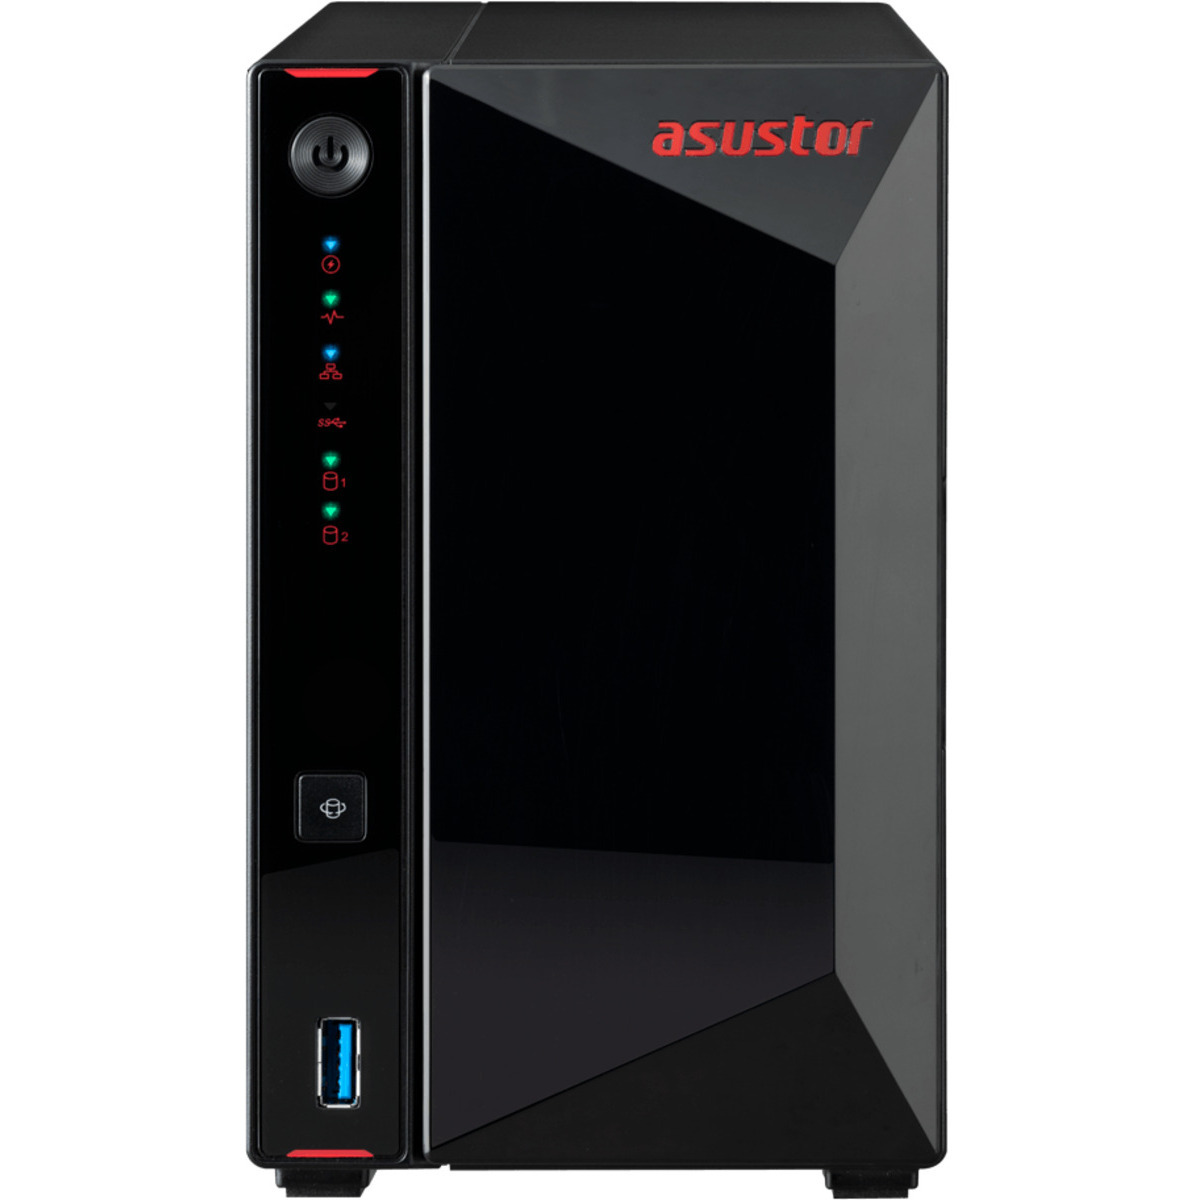 buy ASUSTOR AS5202T Nimbustor 8tb Desktop NAS - Network Attached Storage Device 2x4000gb Toshiba MN Series MN08ADA400E 3.5 7200rpm SATA 6Gb/s HDD NAS Class Drives Installed - Burn-In Tested - ON SALE - FREE RAM UPGRADE - nas headquarters buy network attached storage server device das new raid-5 free shipping simply usa christmas holiday black friday cyber monday week sale happening now! AS5202T Nimbustor